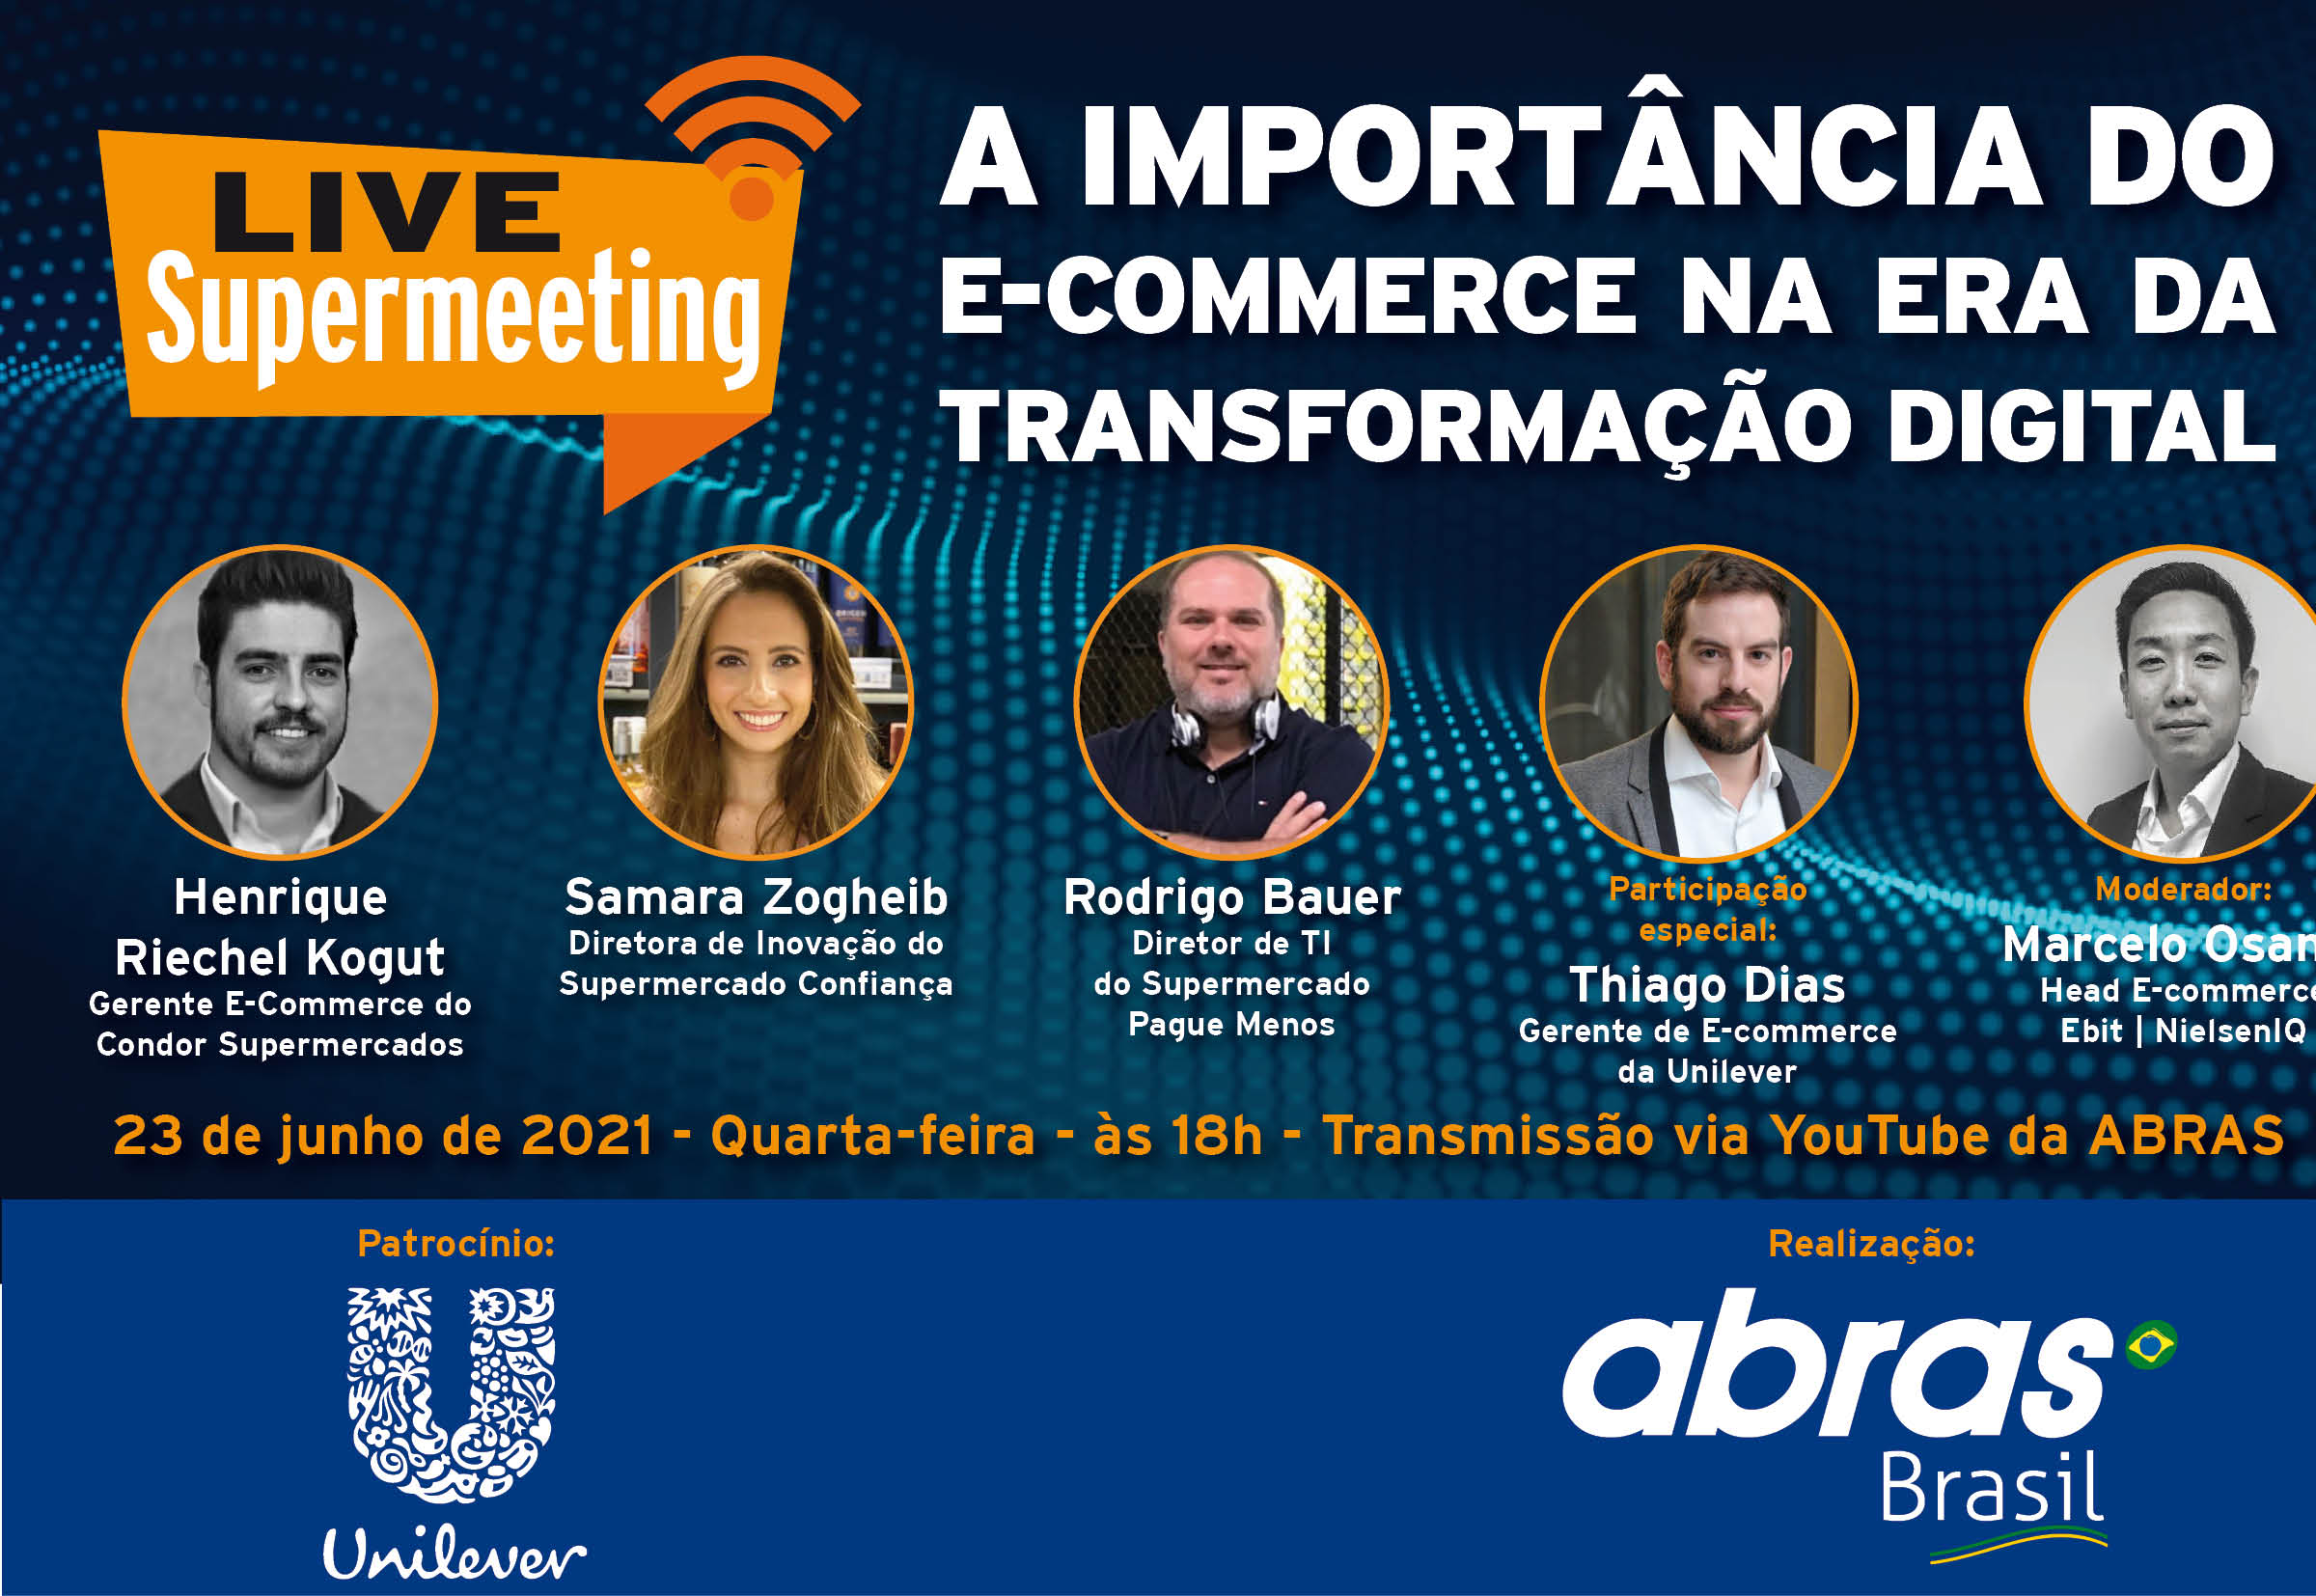 Featured image for “Live Supermeeting ABRAS discute os rumos do e-commerce alimentar”